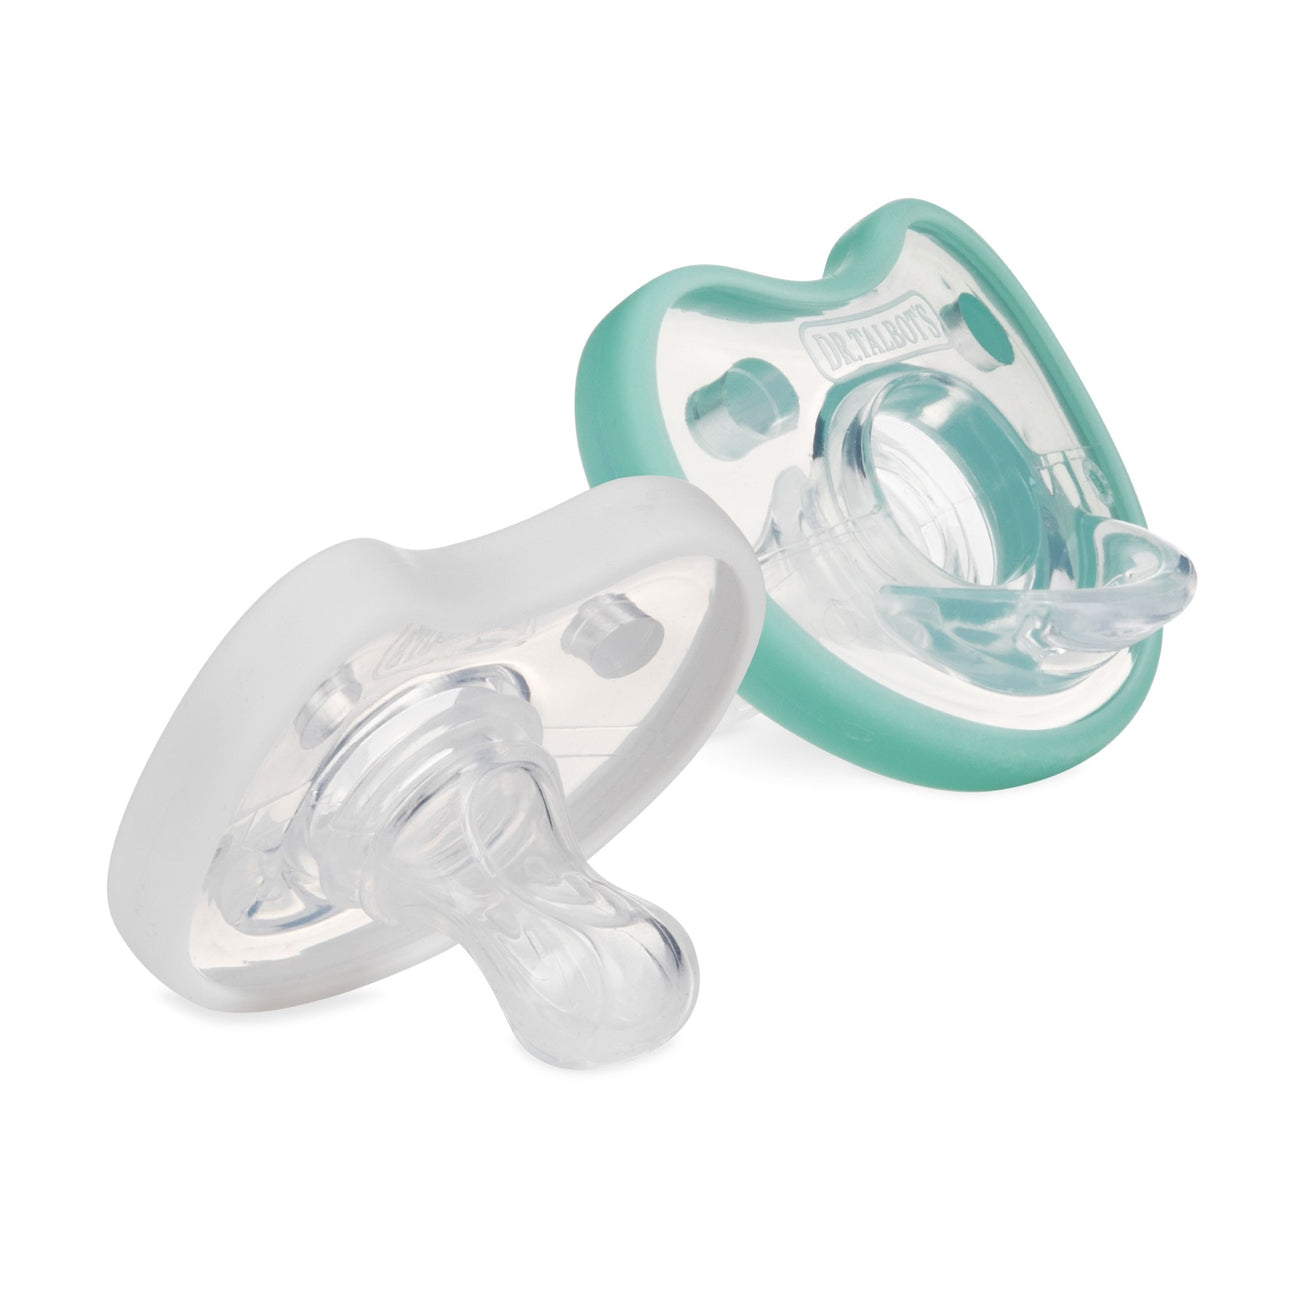 Soft-Flex Orthodontic Pacifiers 0-6 Months - 2 Pack - Dr Talbot's US